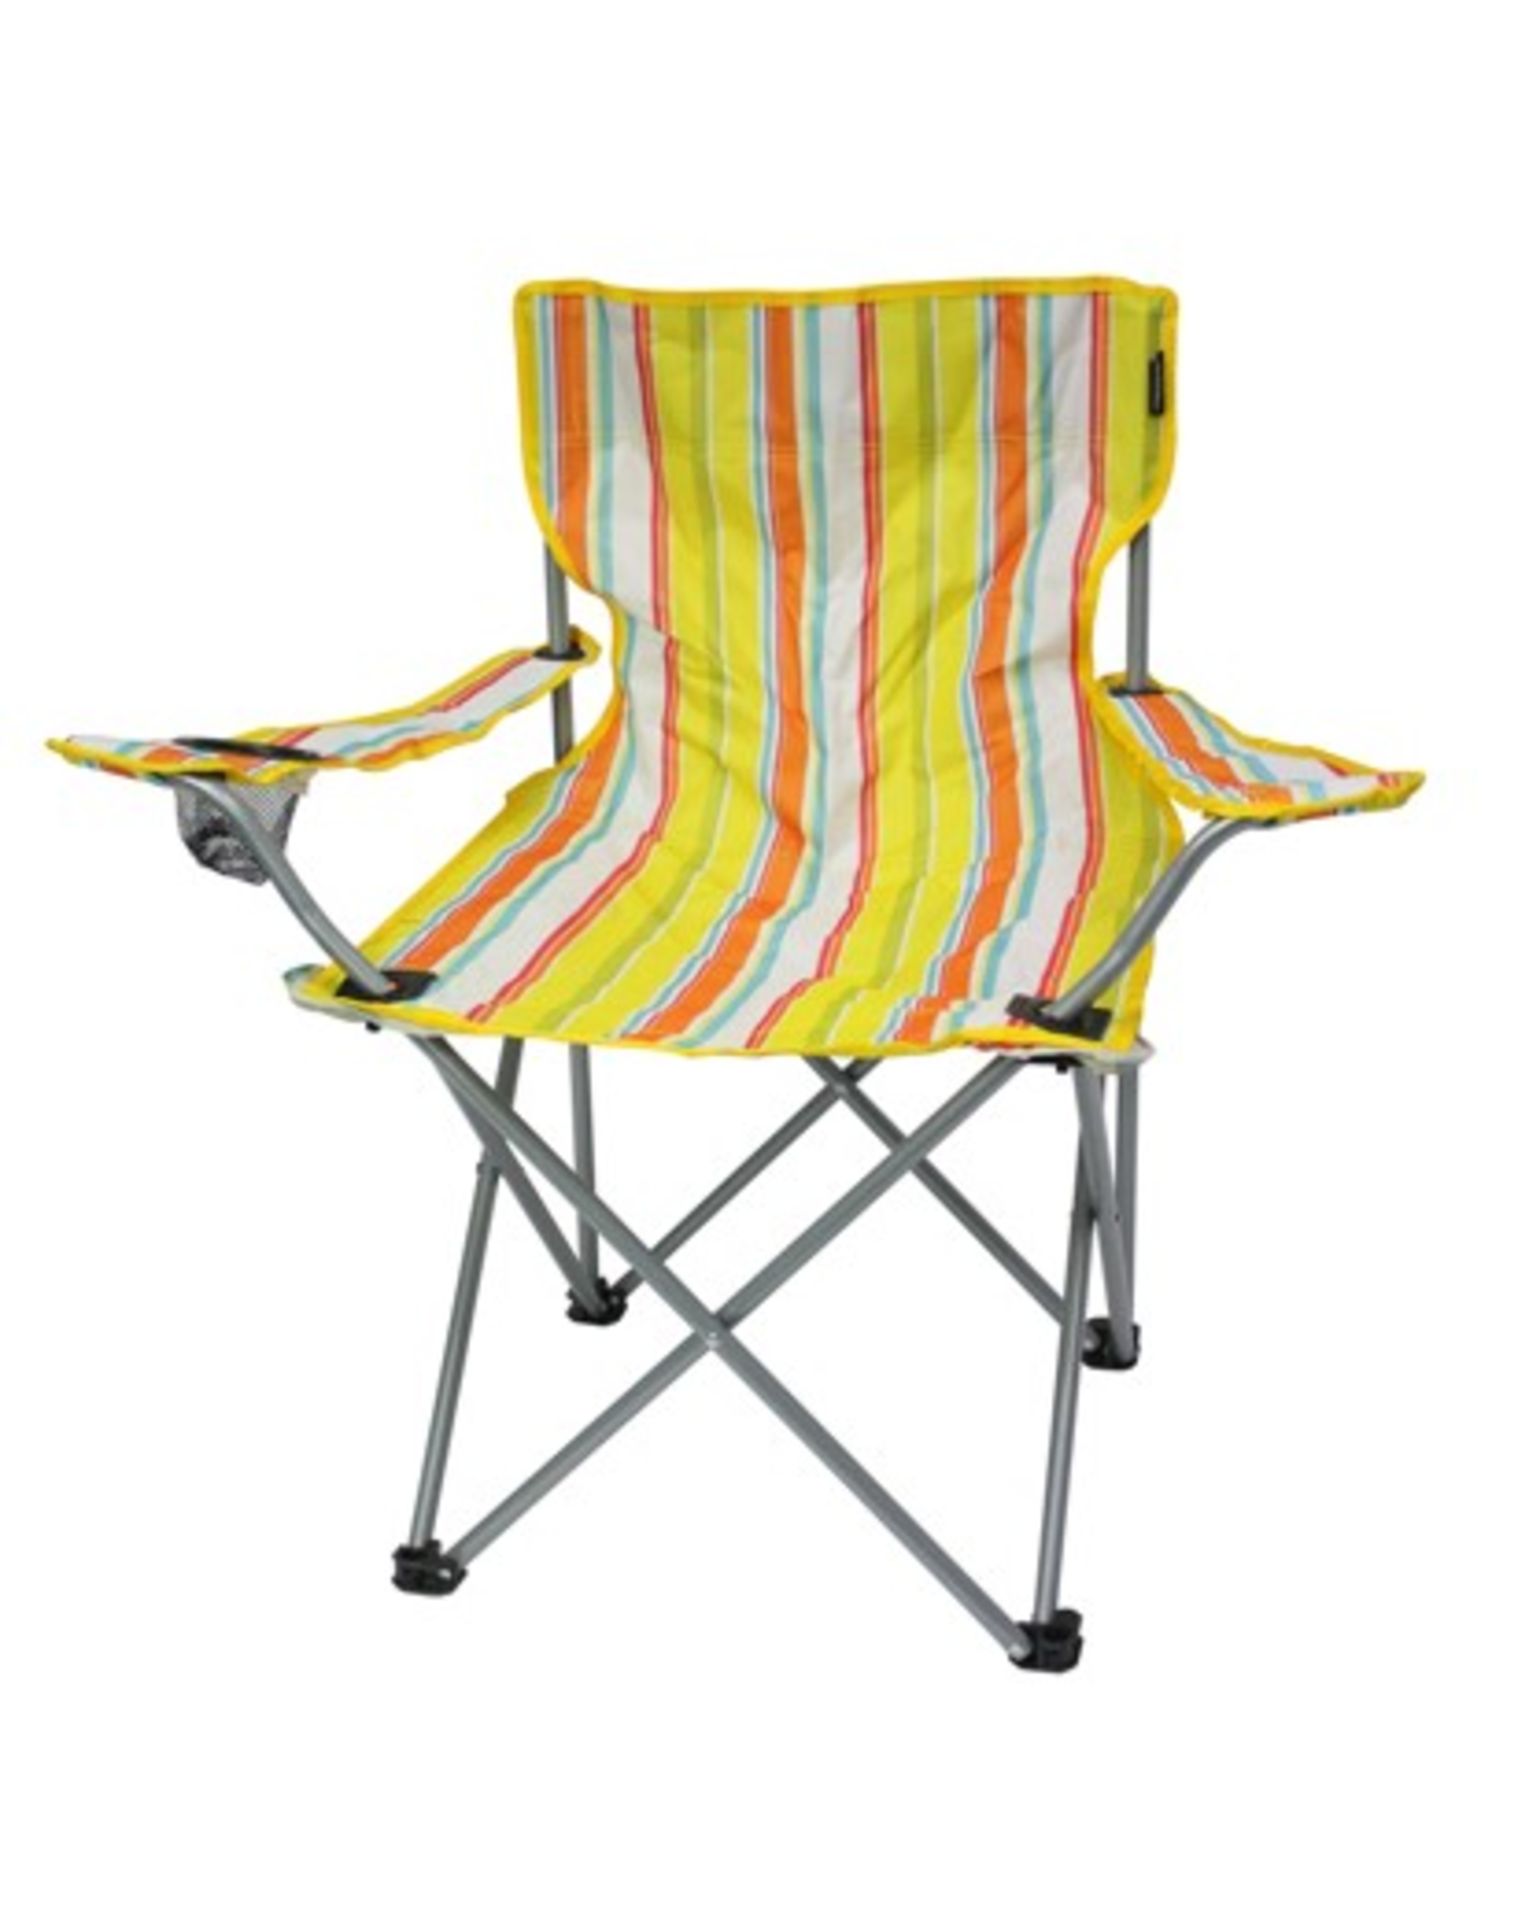 V Grade A Quickseat Multi Colour Camping Chair With Cup Holder X 2 YOUR BID PRICE TO BE MULTIPLIED